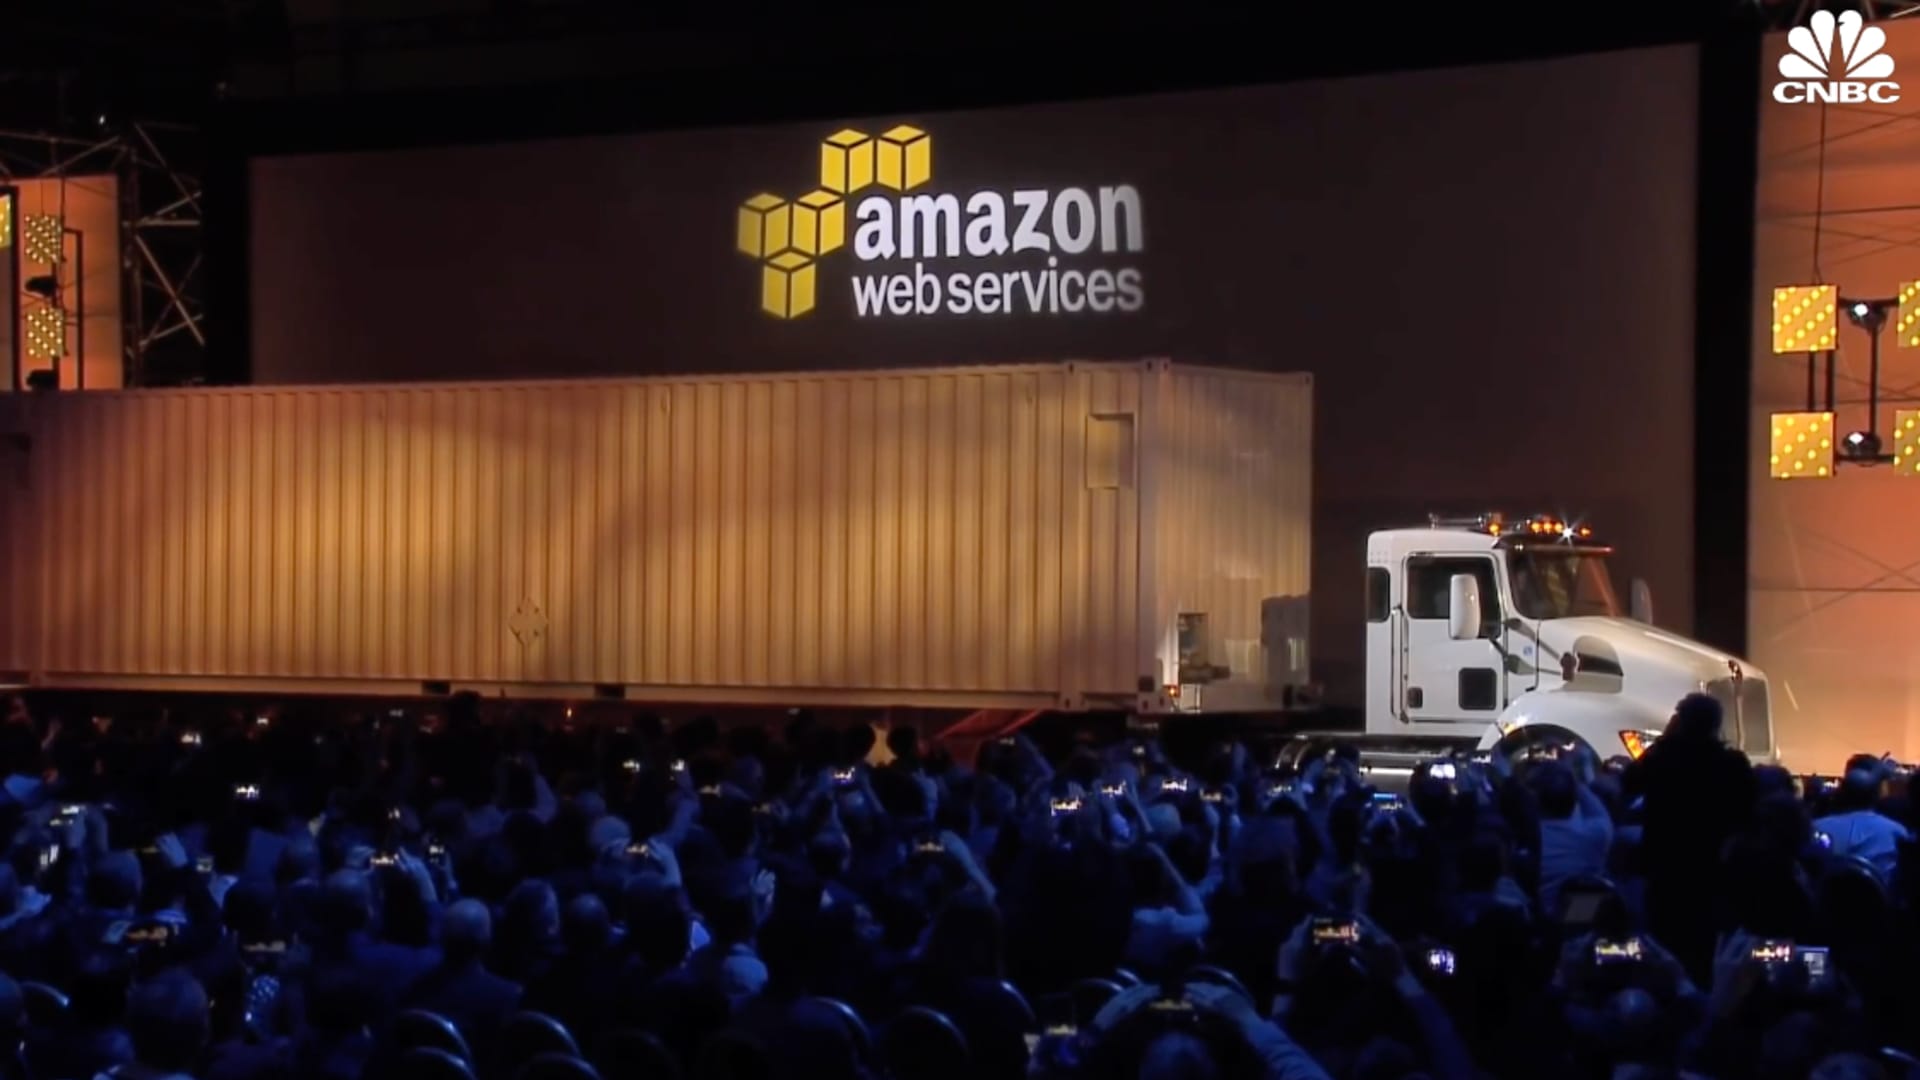 At Amazon's     annual cloud conference in 2016, the company captured the crowd's attention by driving an 18-wheeler onstage. Andy Jassy, no